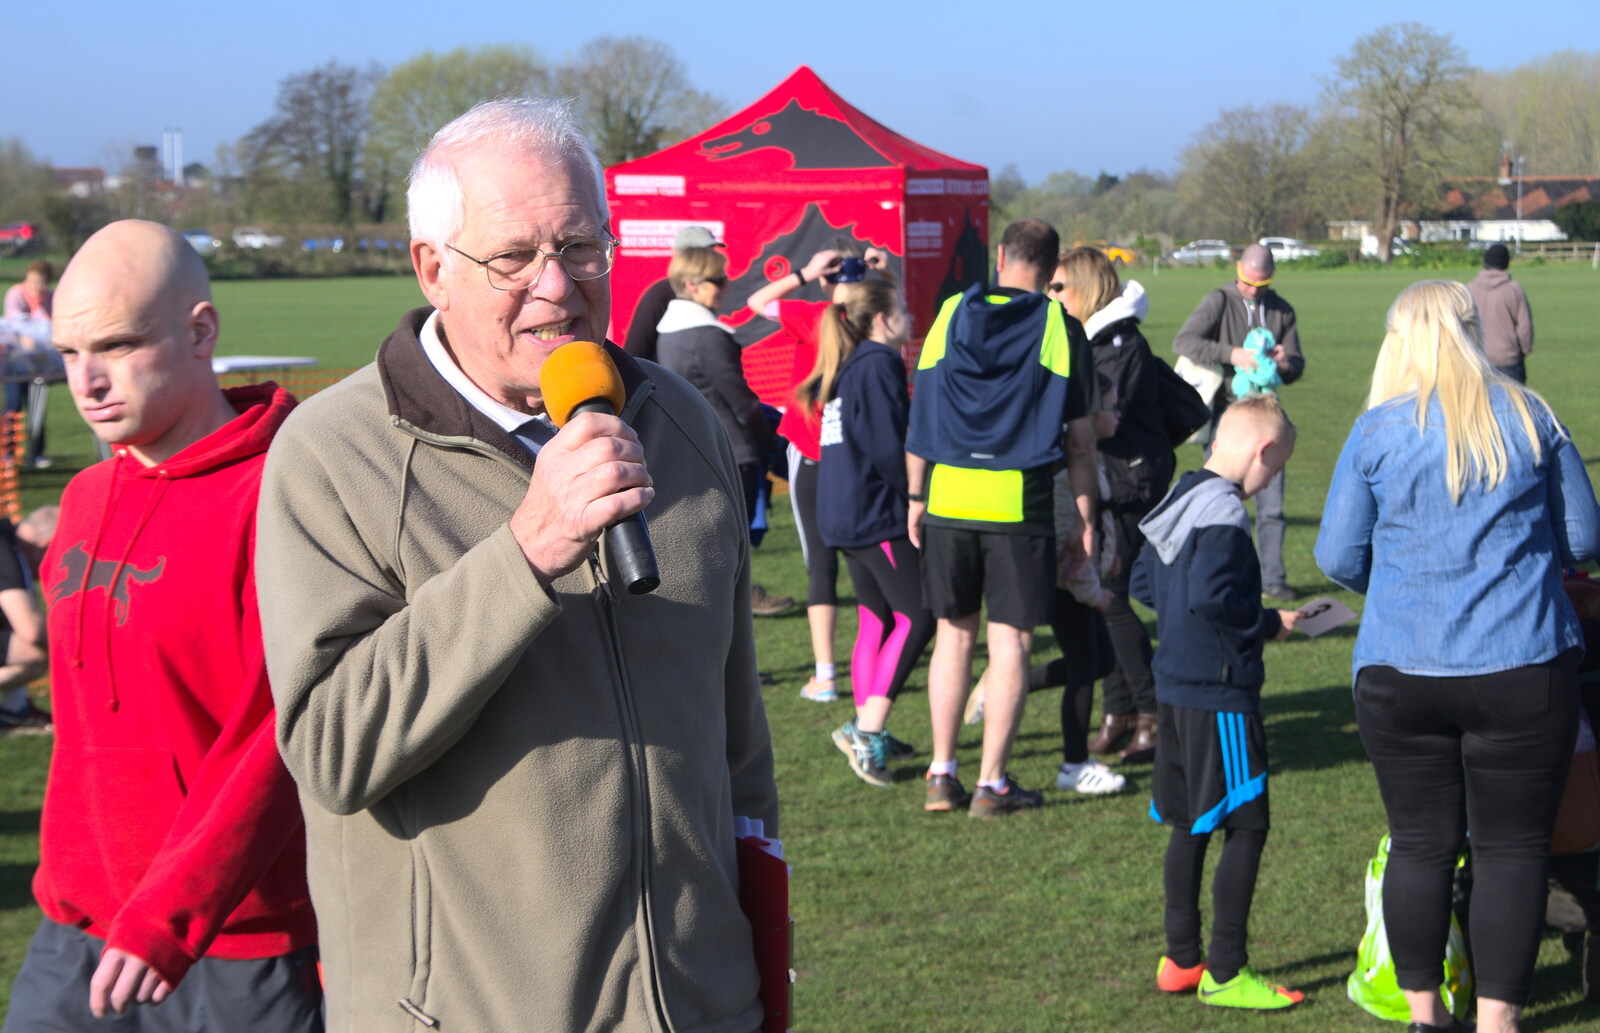 The announcer does some announcing from The Black Dog Festival of Running, Bungay, Suffolk - 2nd April 2017